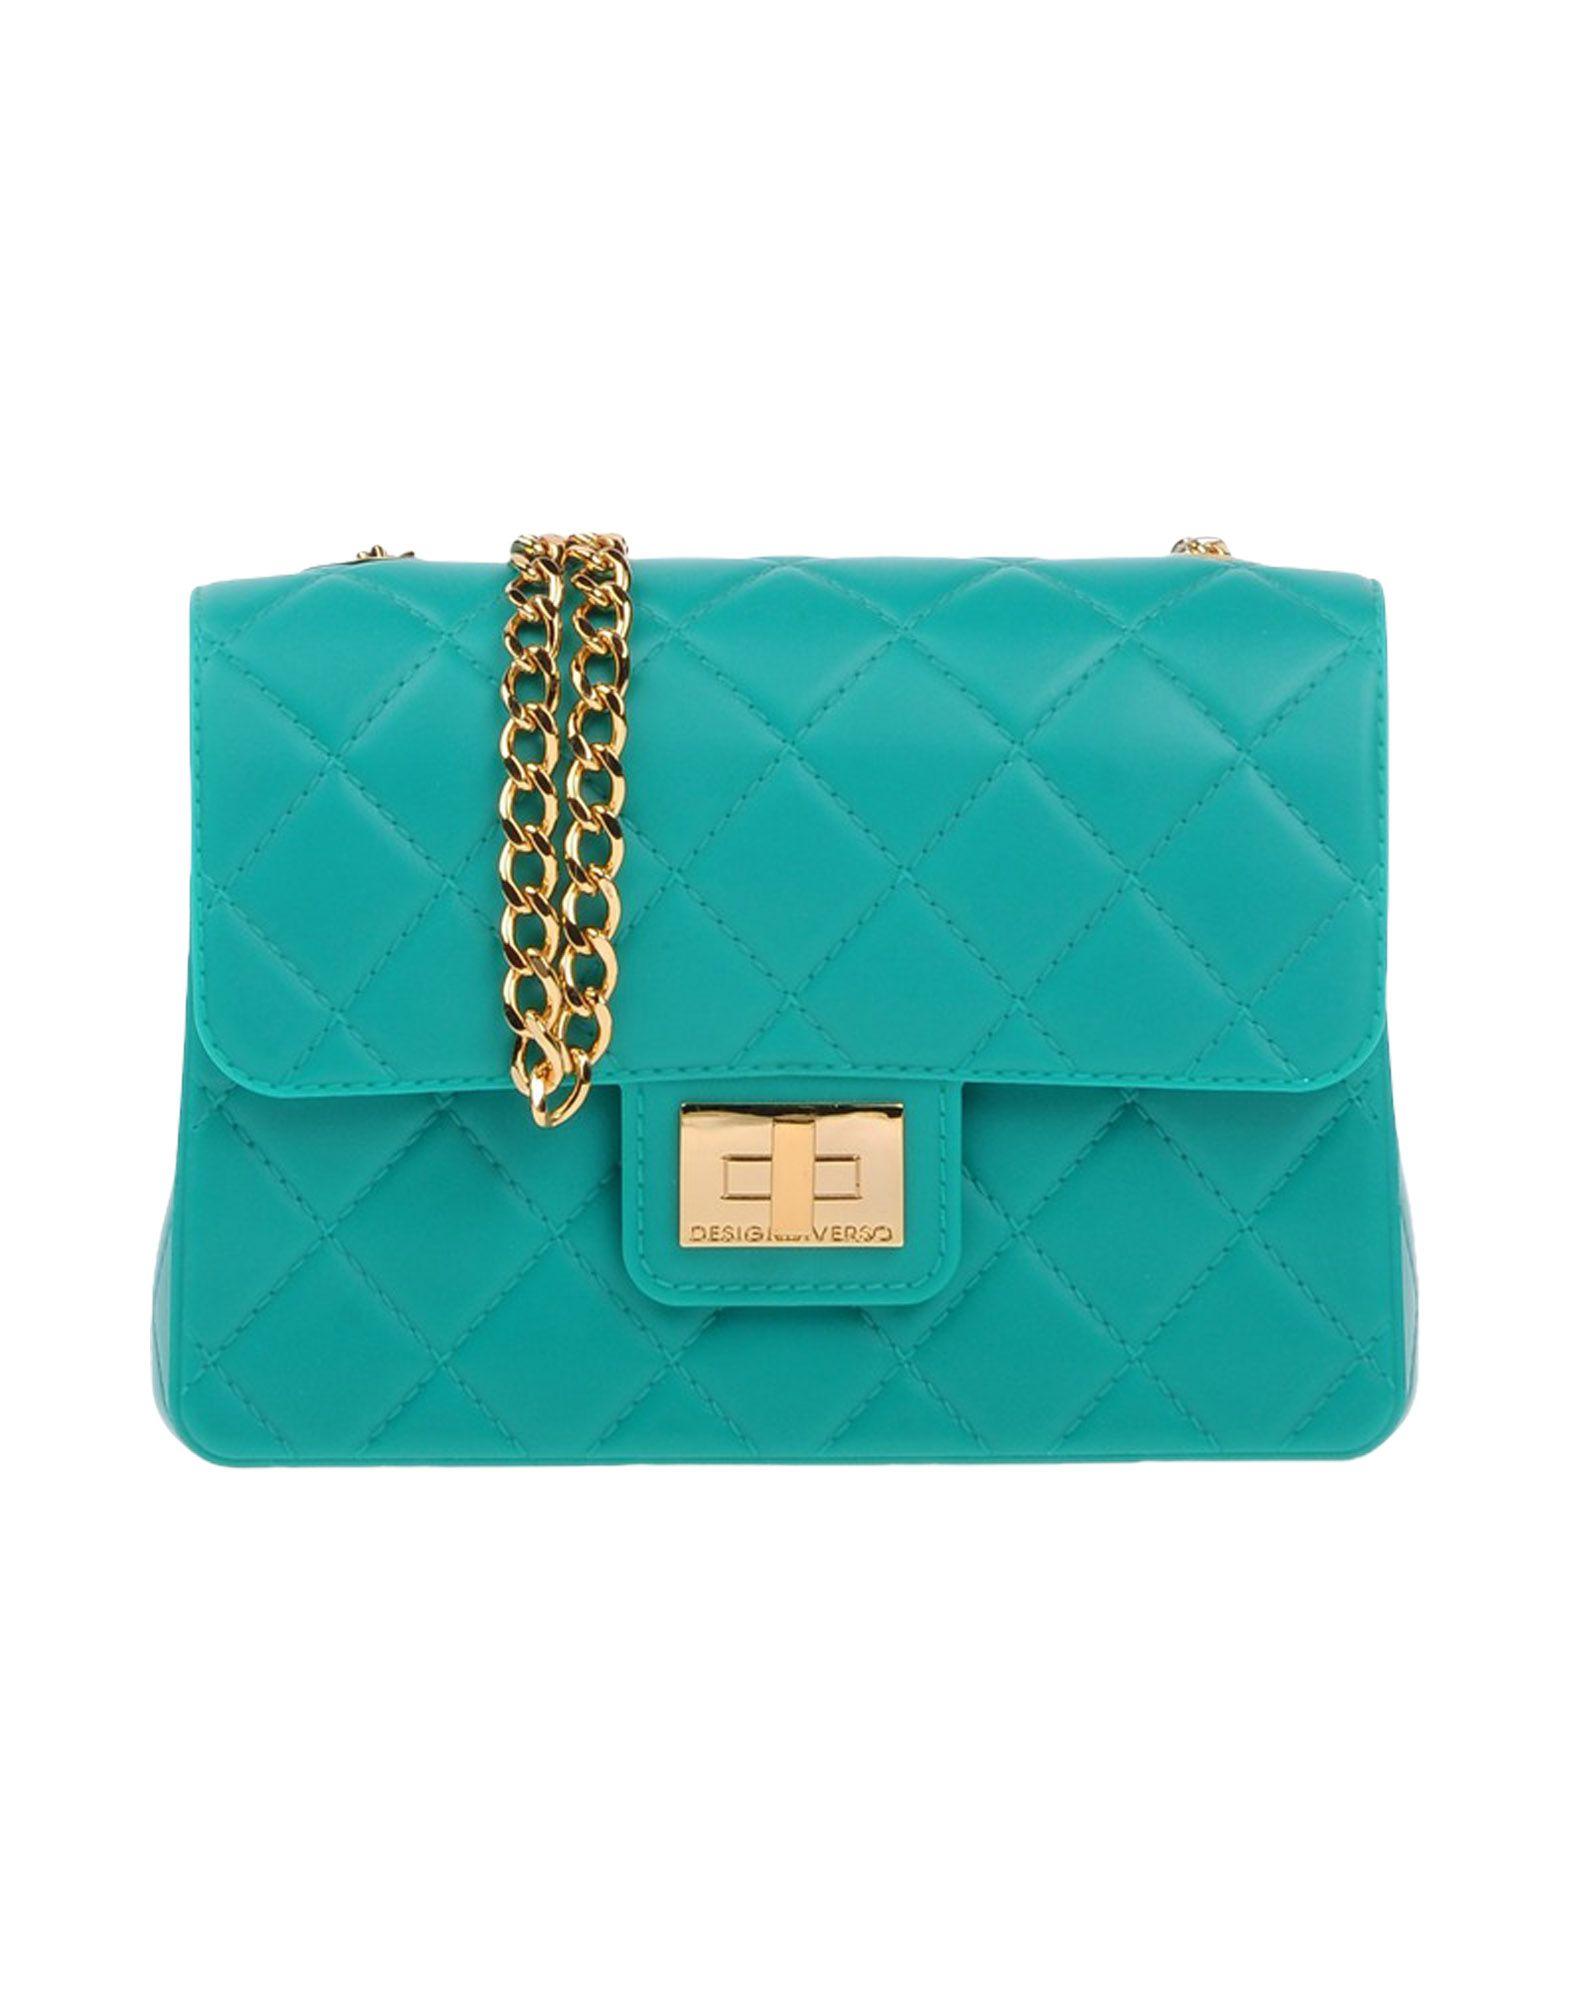 Lyst - Designinverso Cross-body Bags in Green - Save 32%